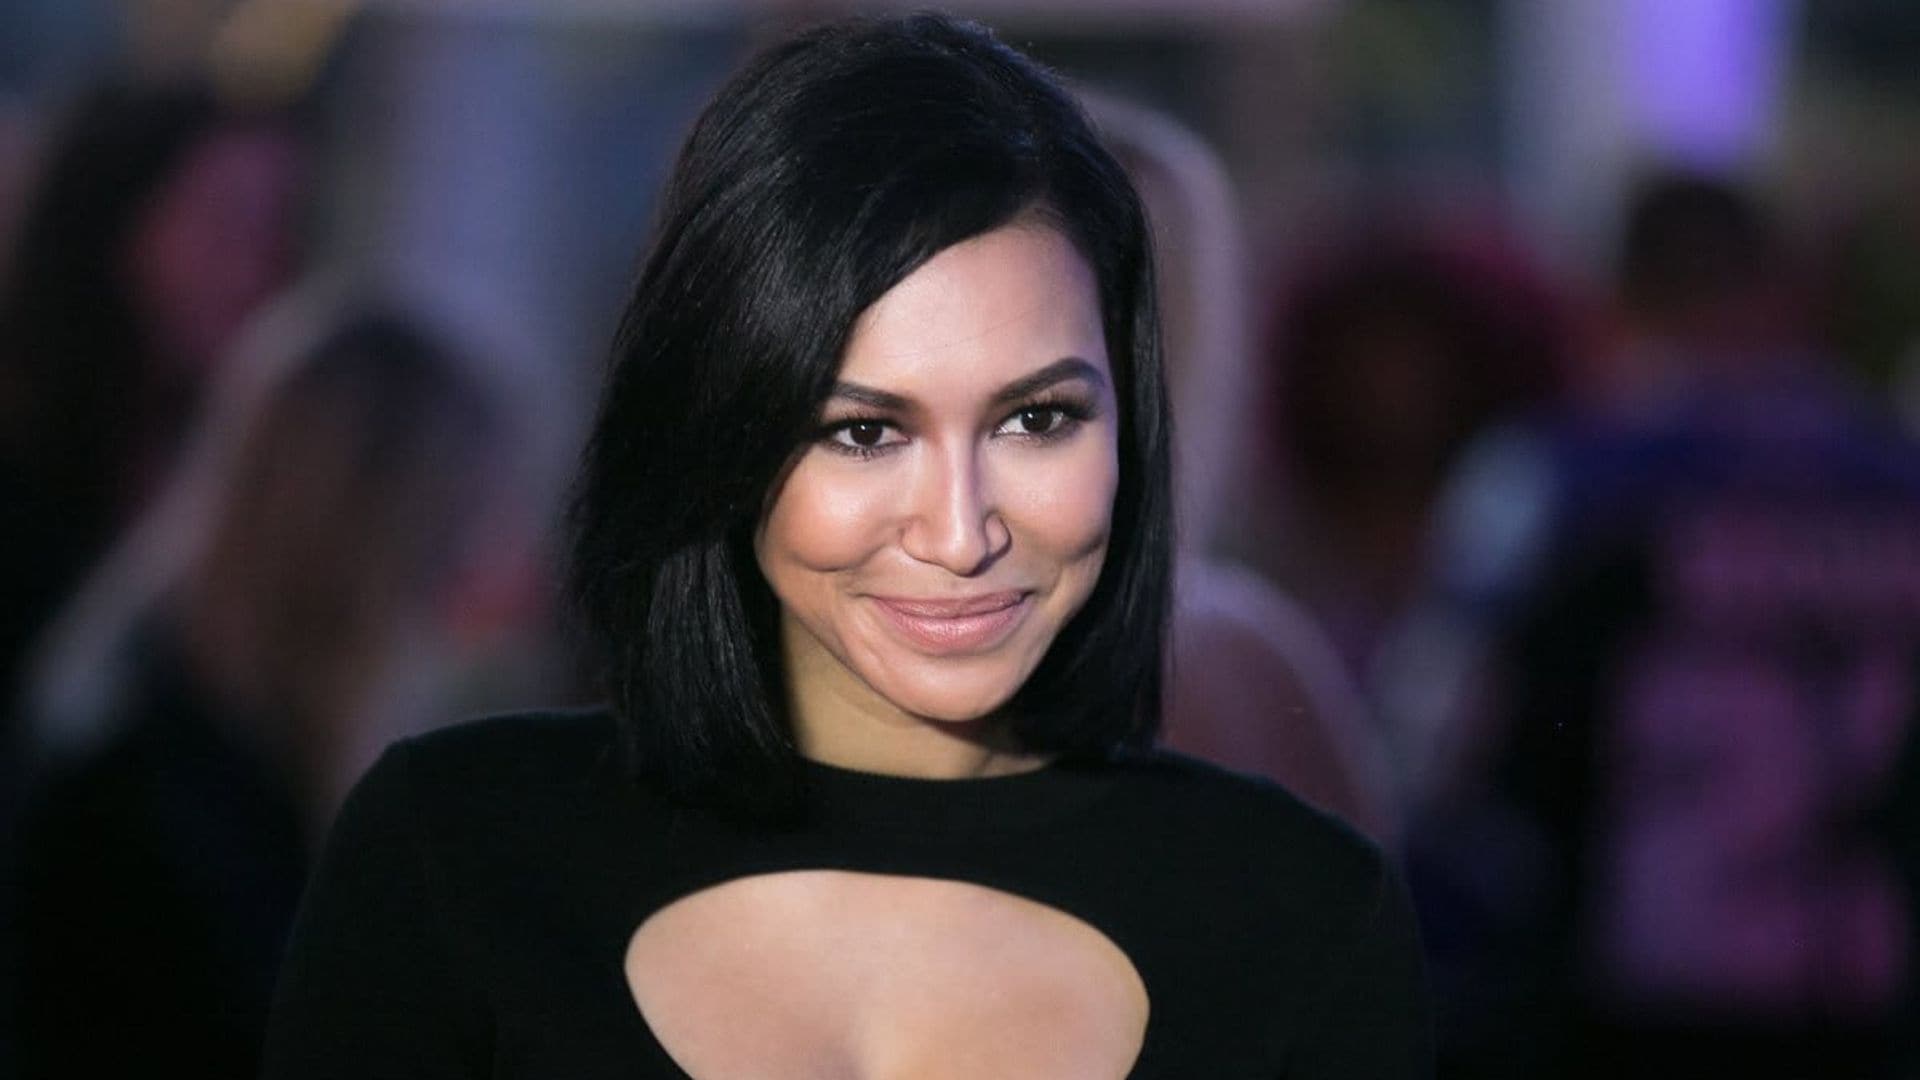 Remembering Naya Rivera one year after her tragic death